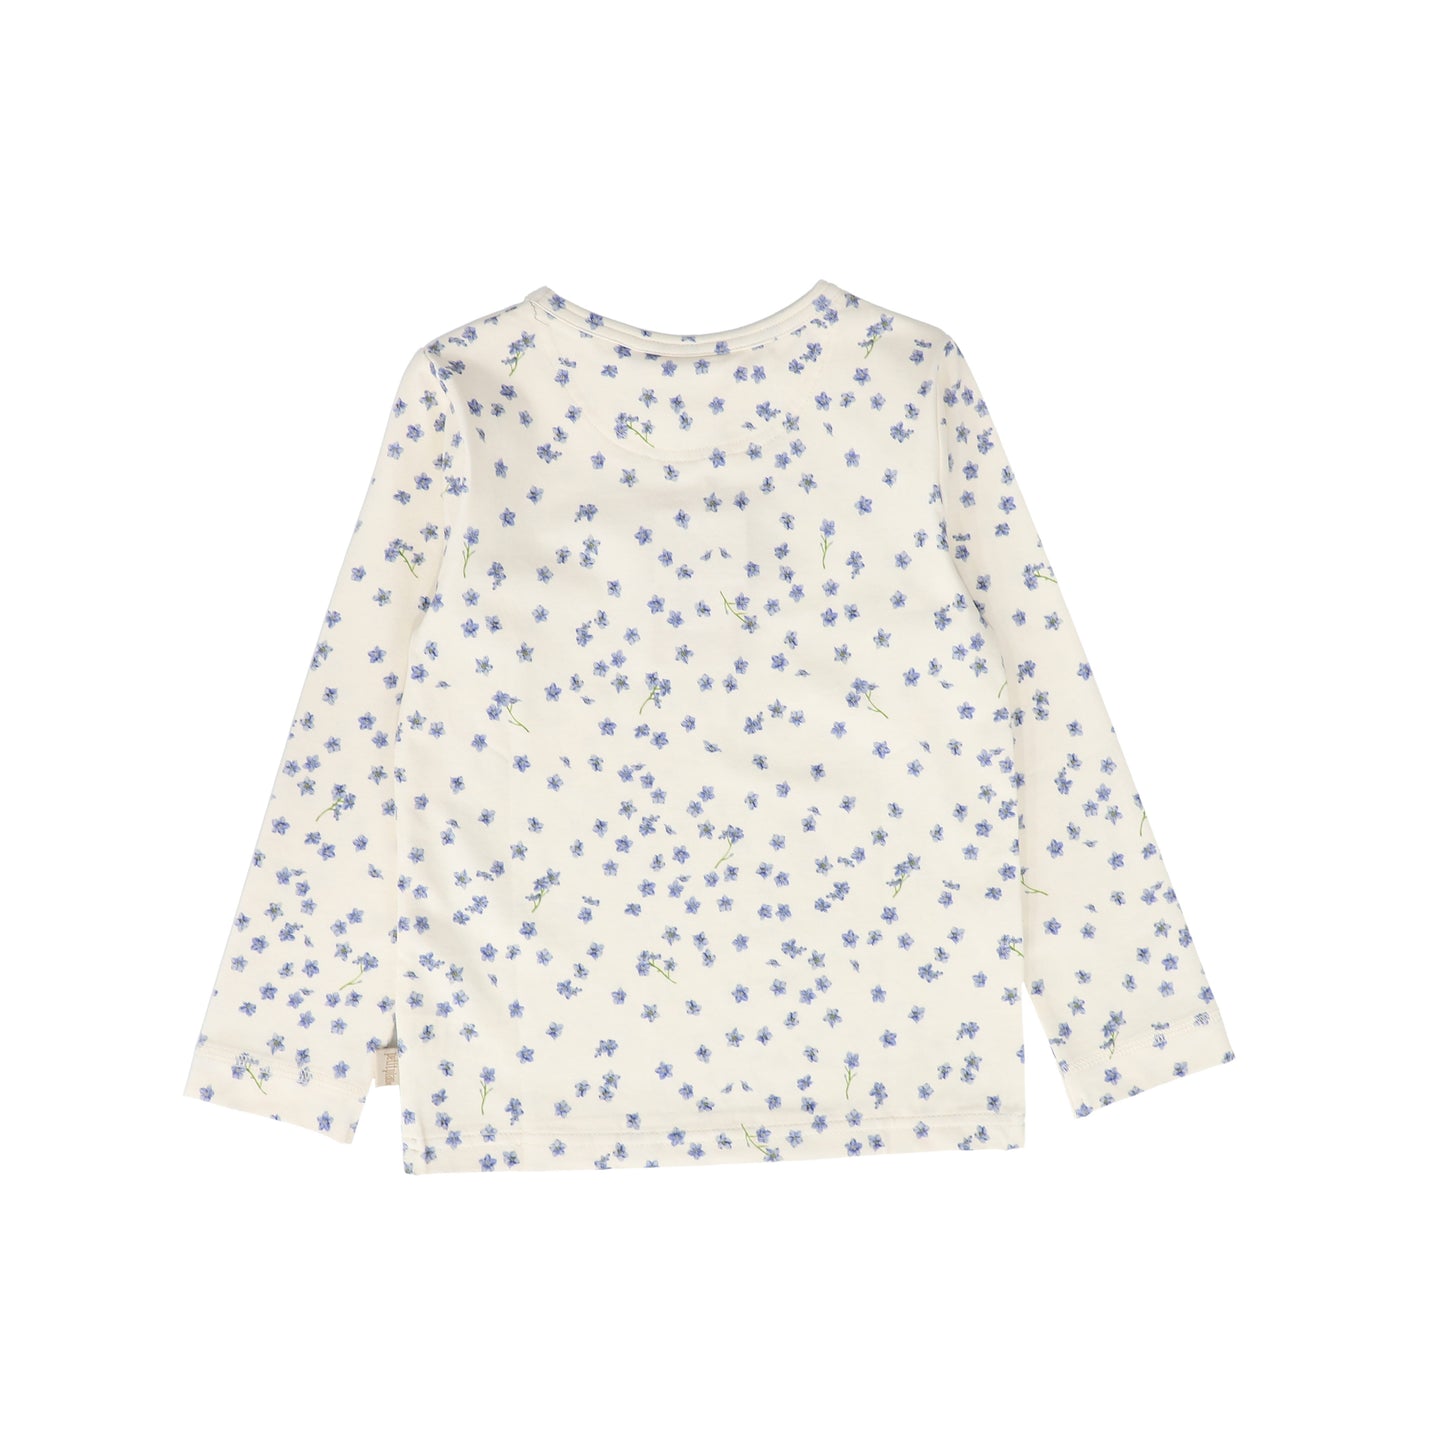 PETIT PIAO CREAM/BLUE FLORAL PRINTED TEE